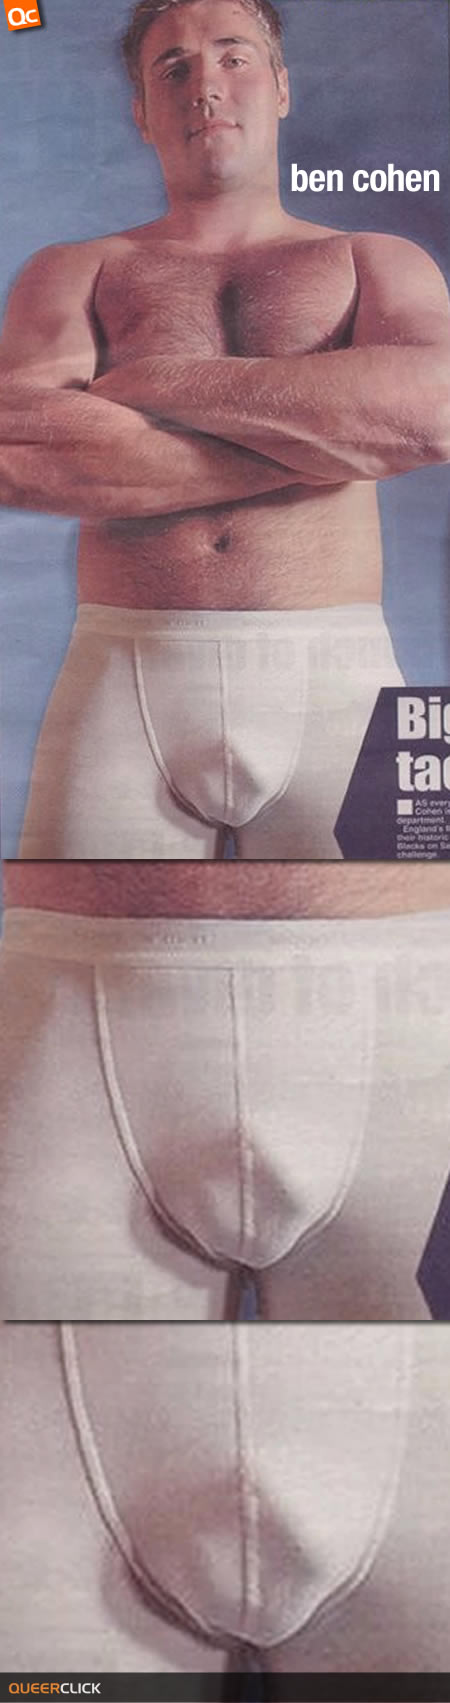 Ben Cohen's Underwear Bulge We're having our favourite British rugby player